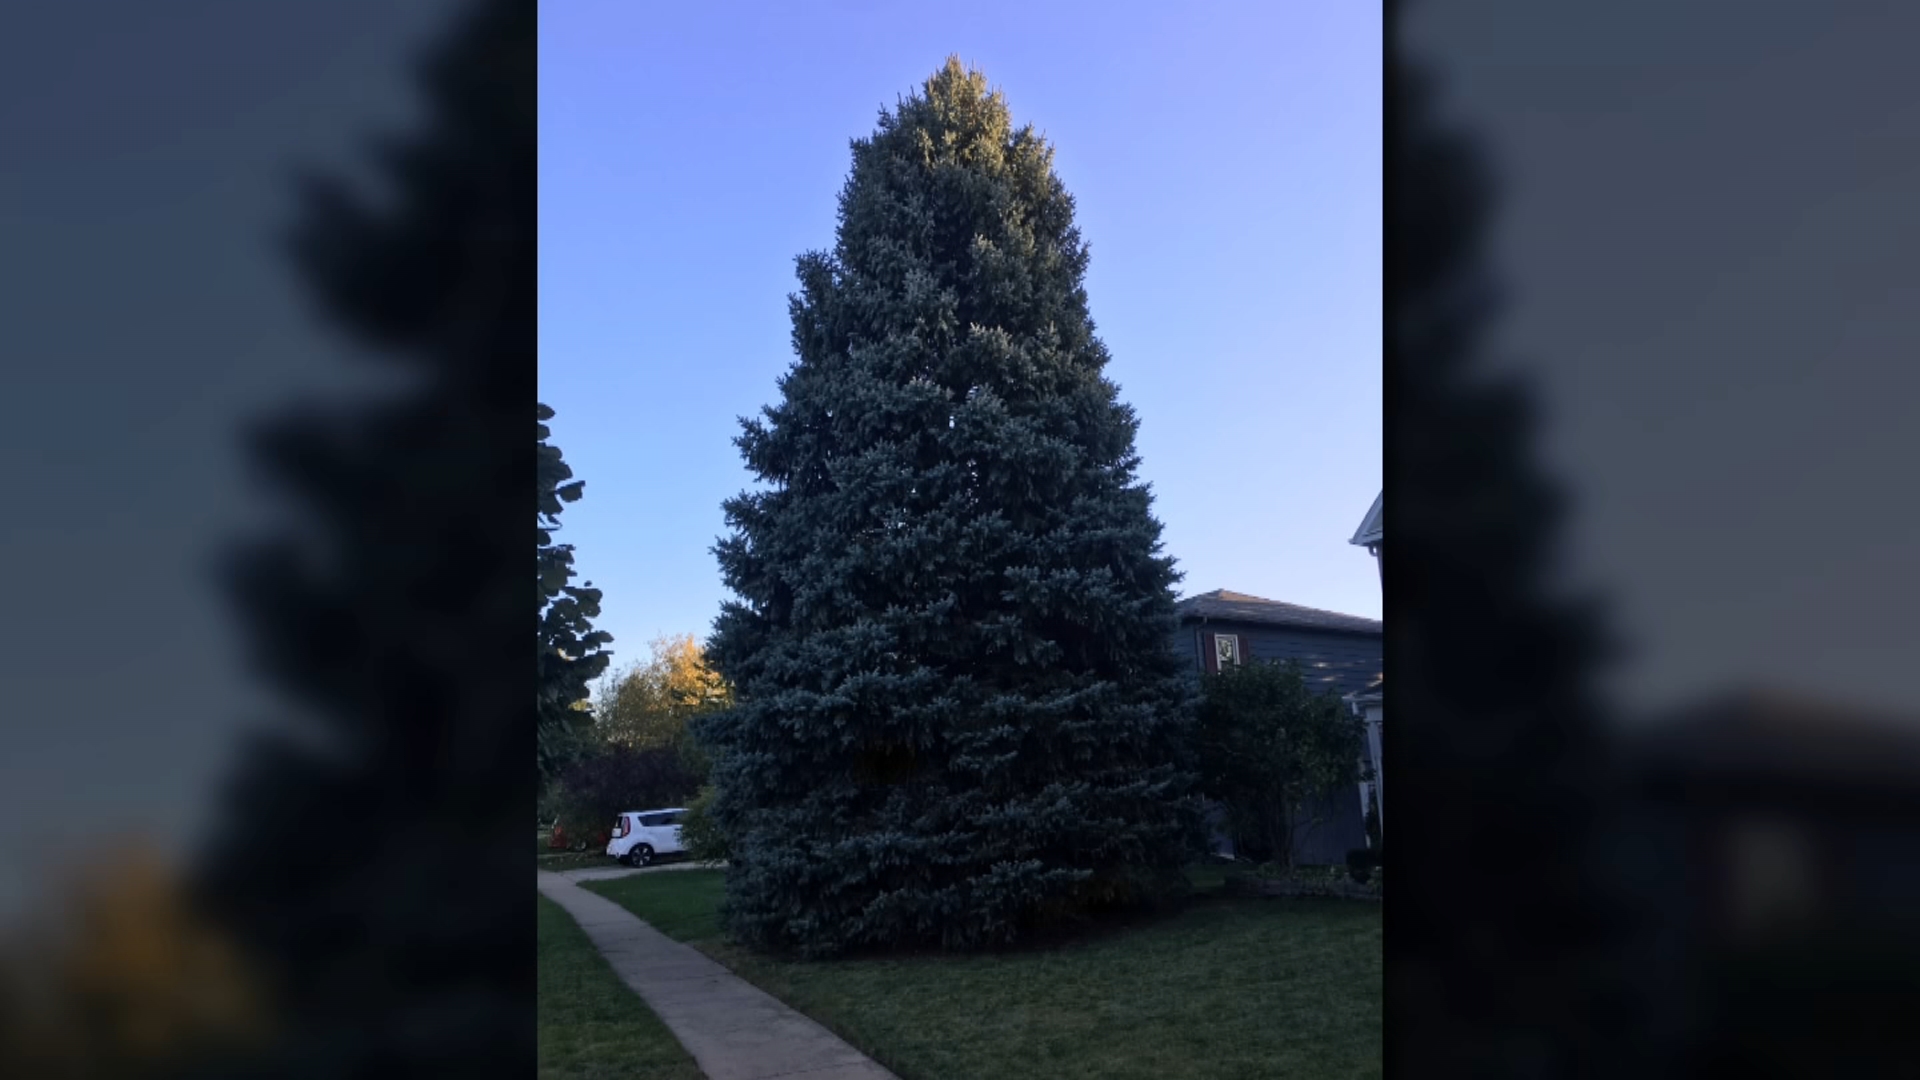 This is Chicago's 2019 Christmas Tree